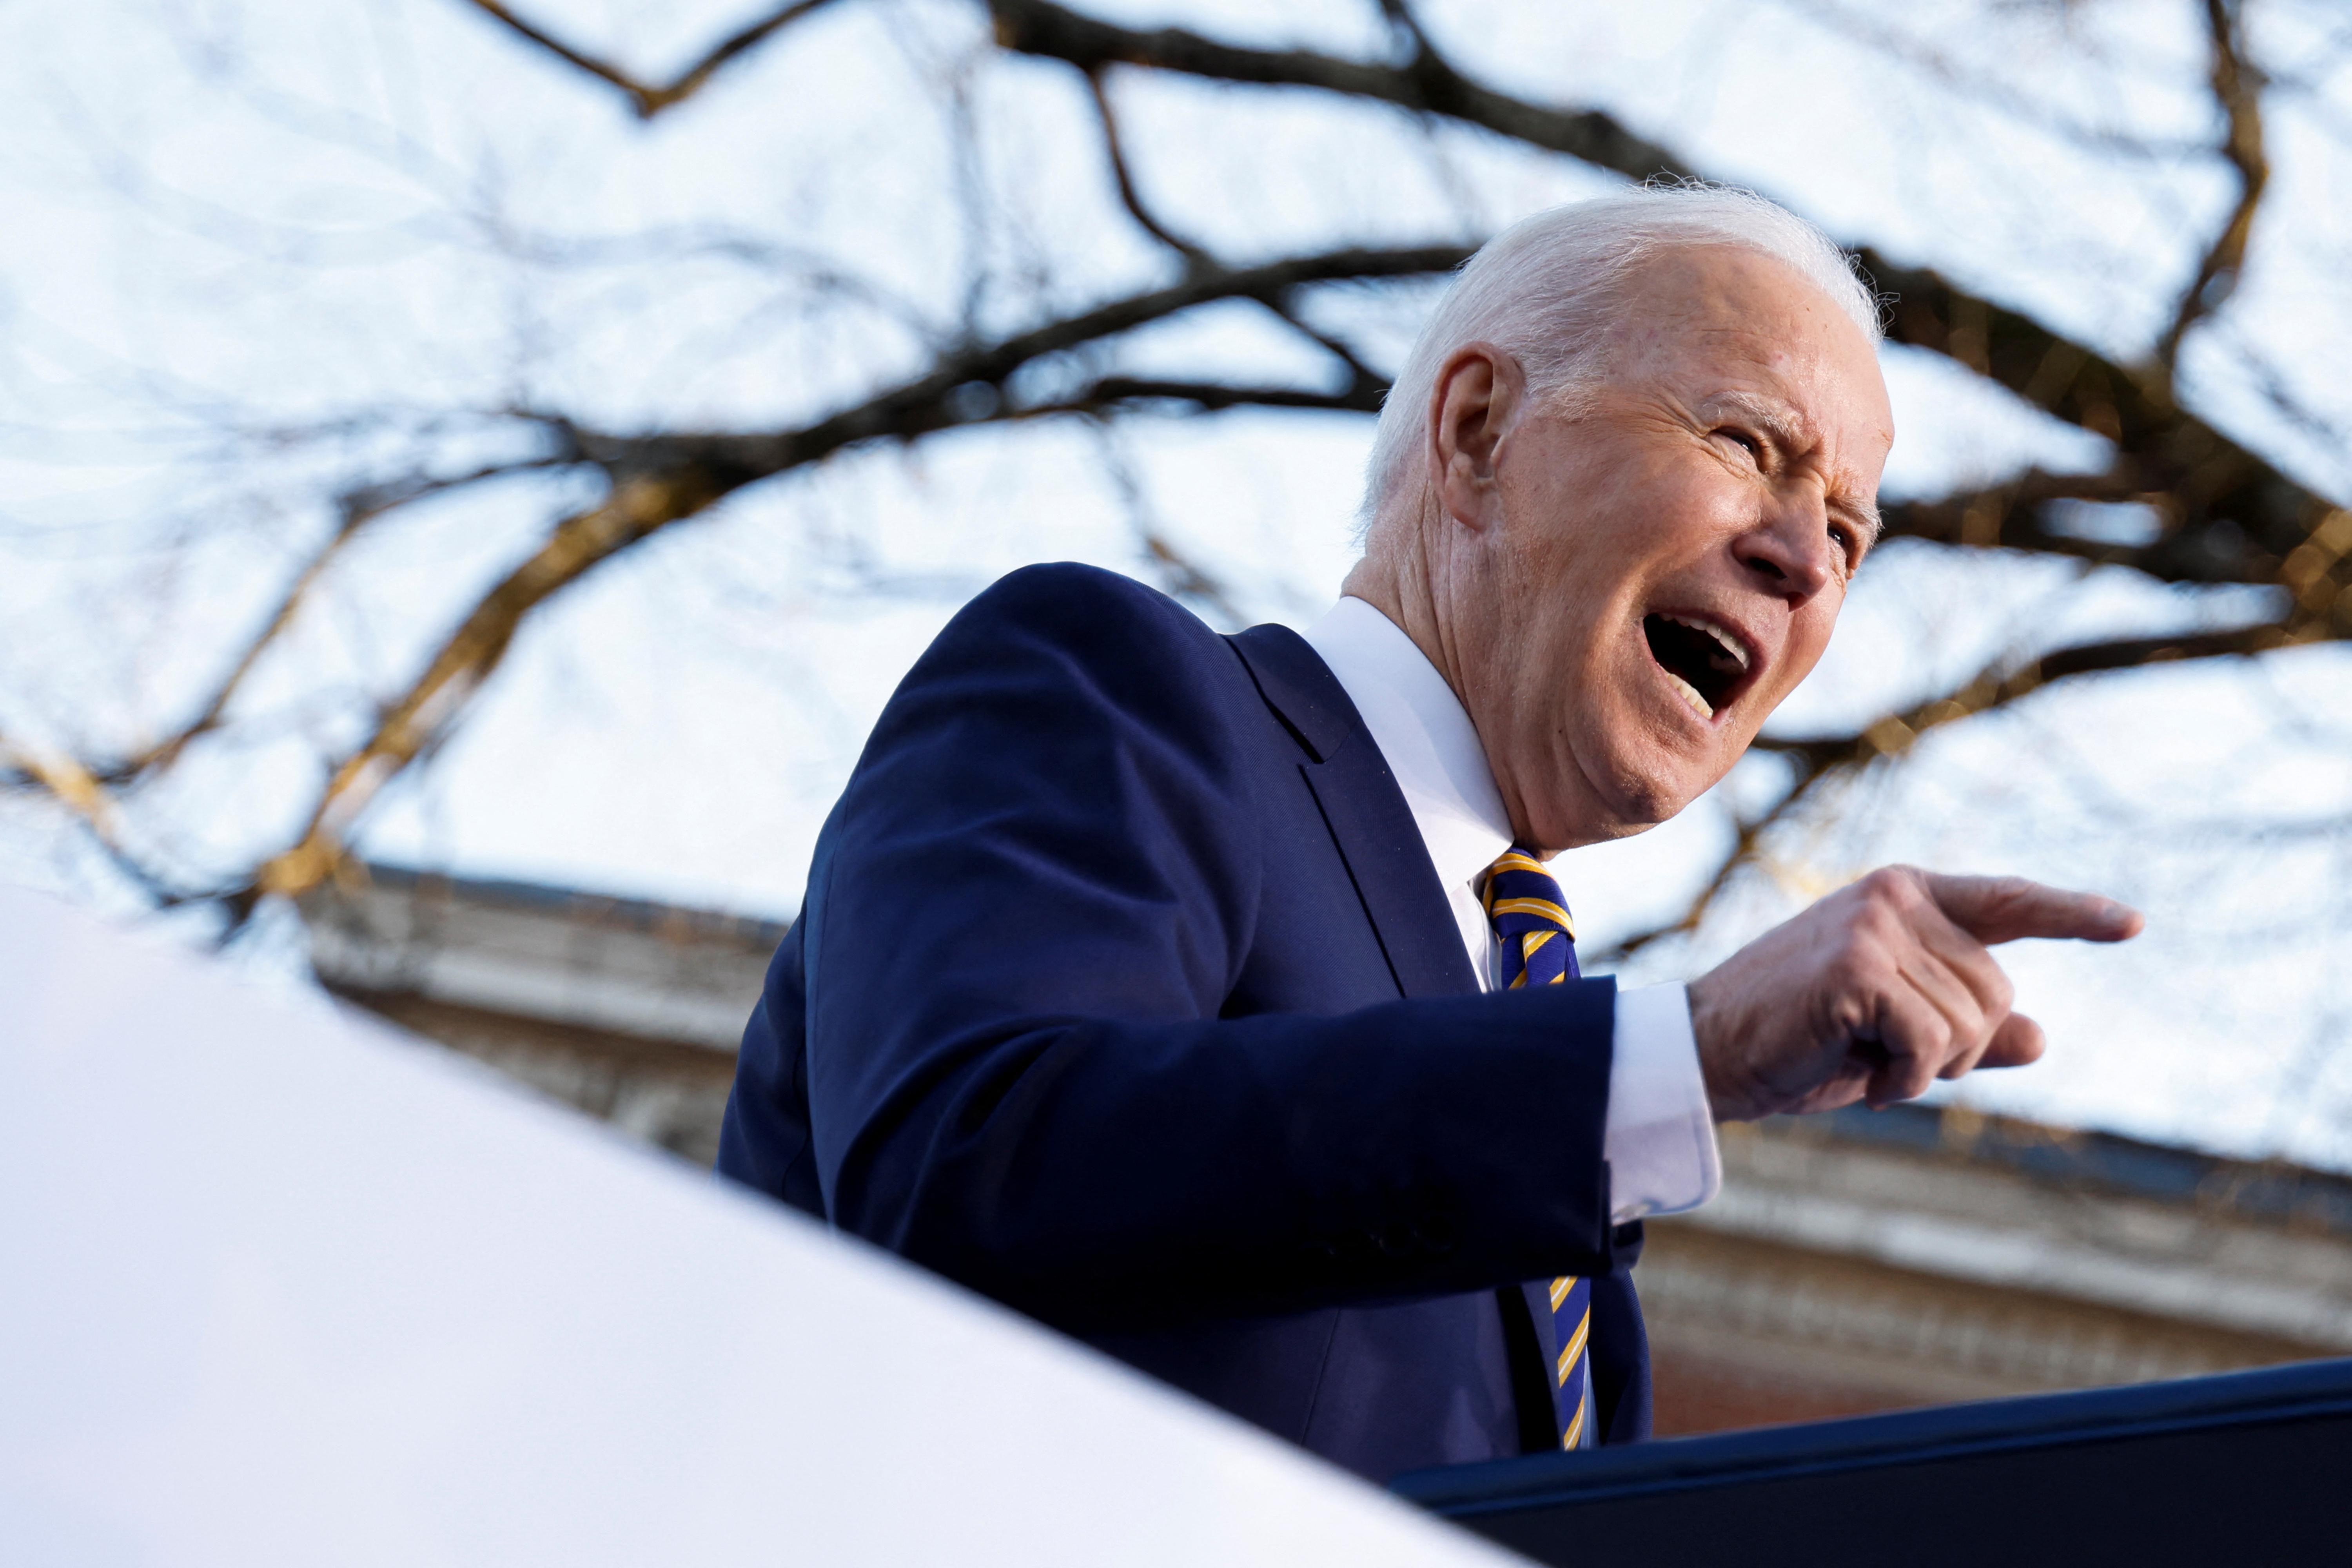 Hard Numbers: Biden ditches filibuster, Afghan aid, global economic slump, Chinese lockdowns